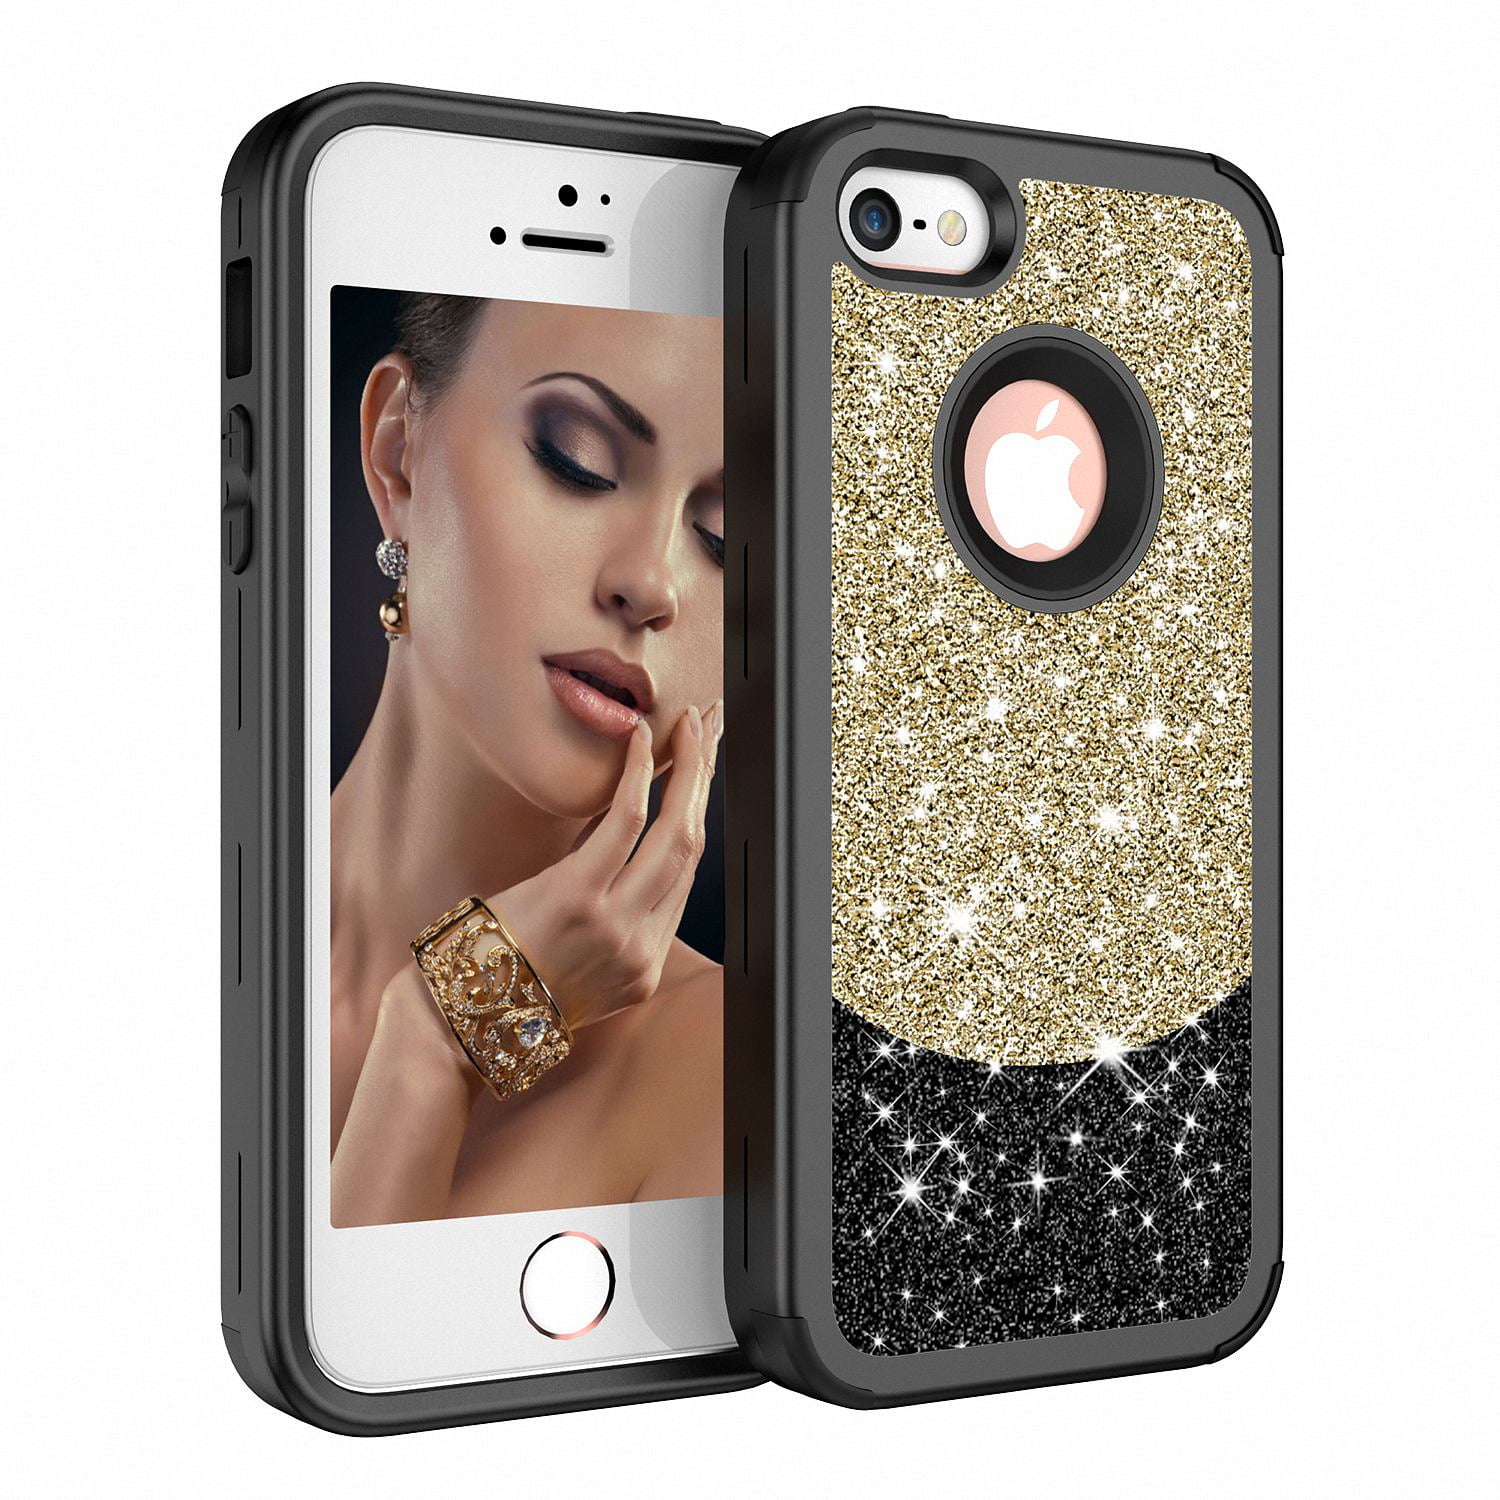 Iphone 5 5s Case Iphone Se 2016 Edition Case Cover Allytech Silicone